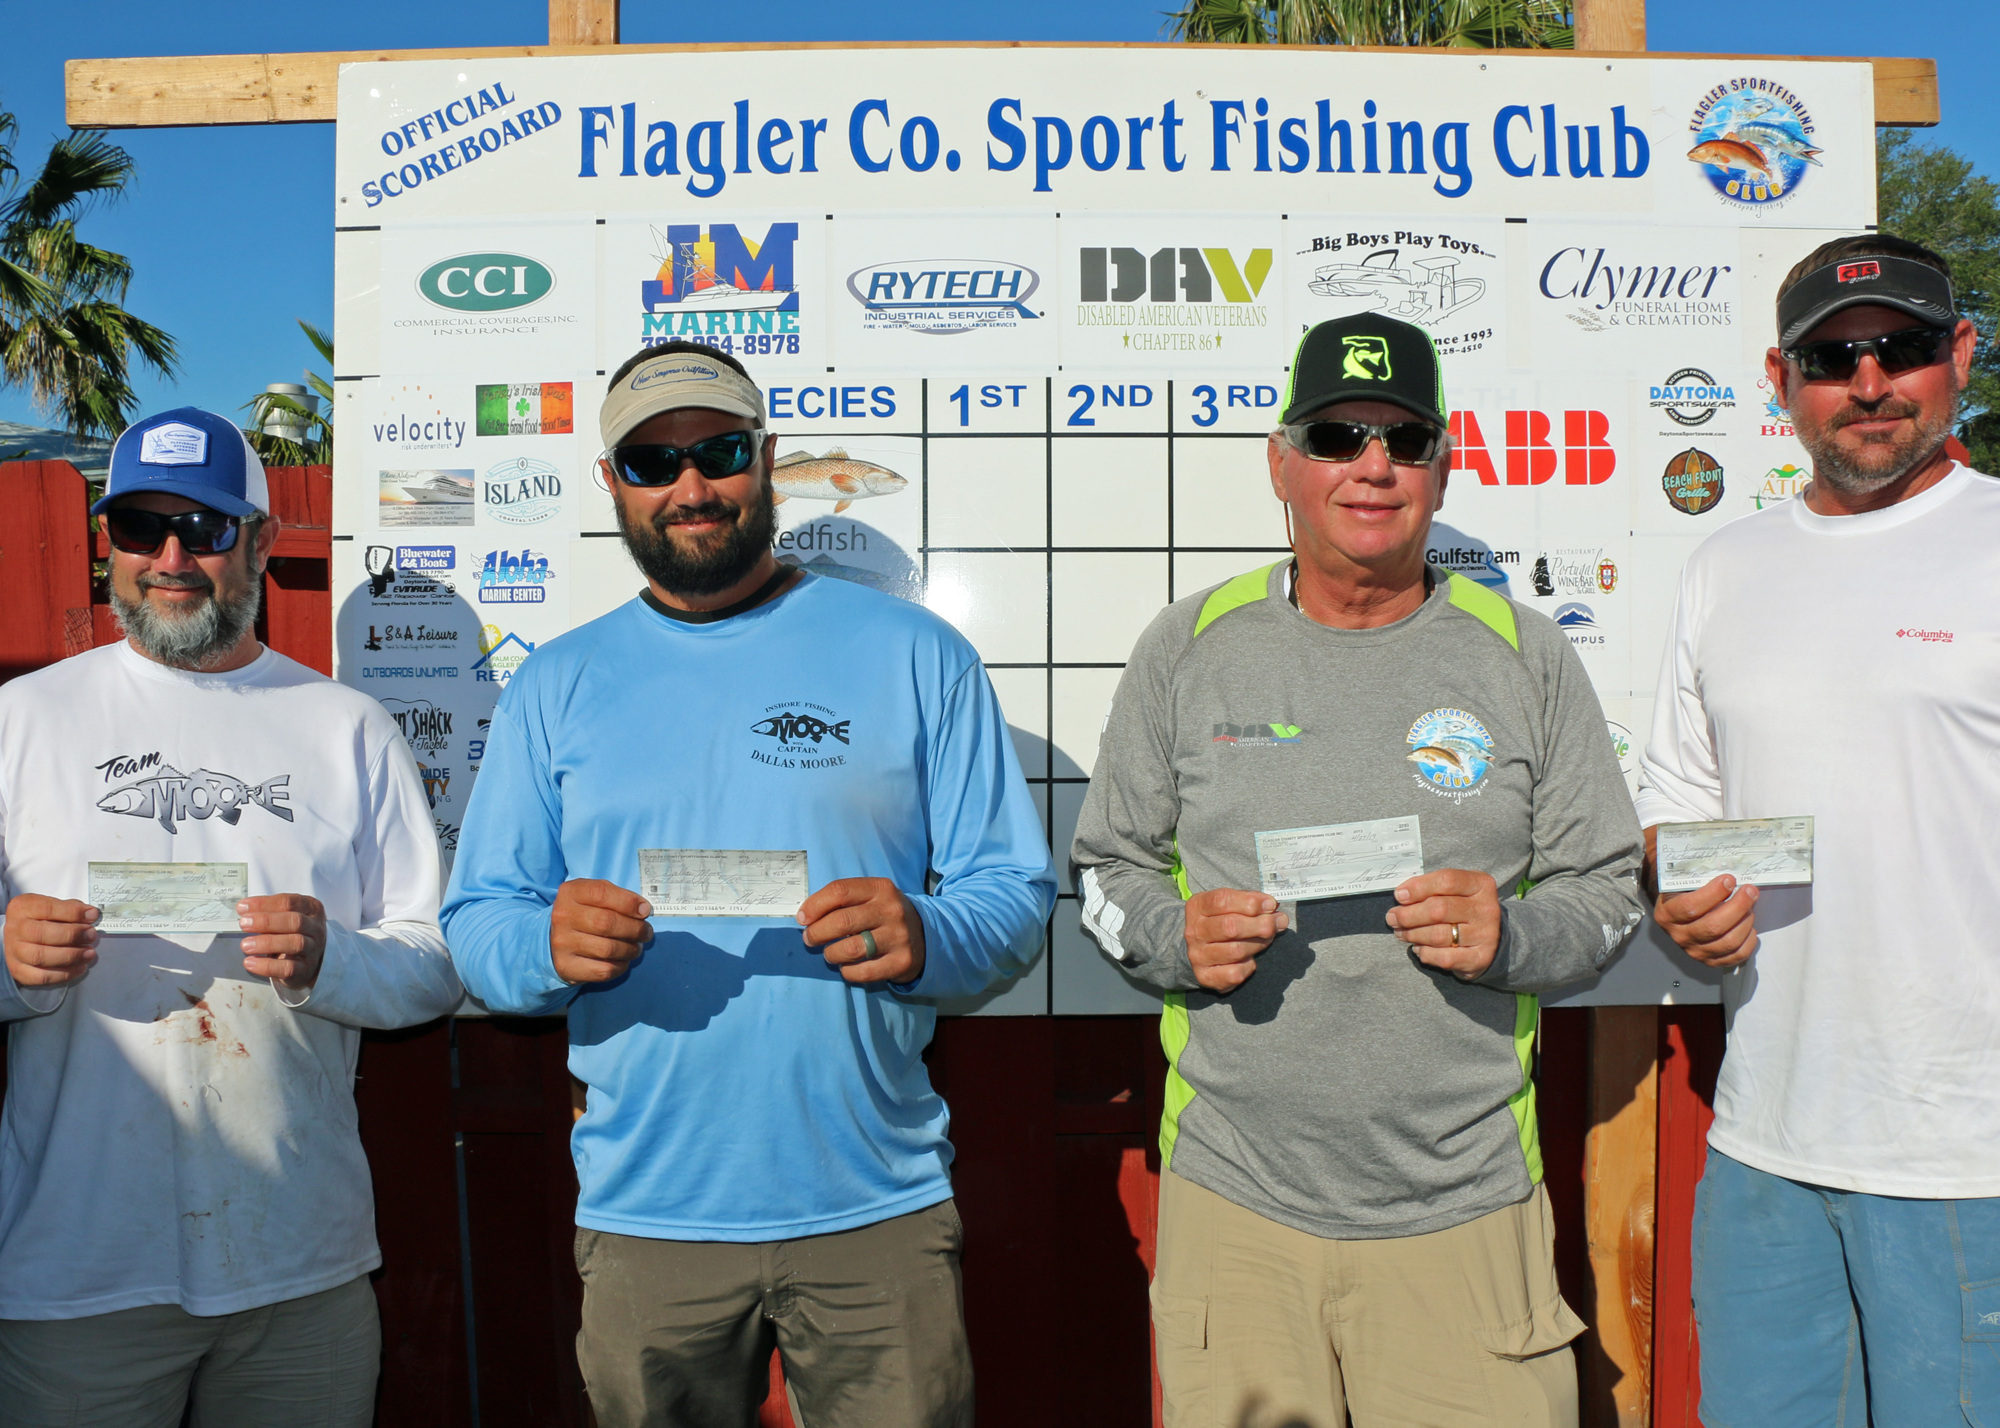 Sportfishing Club Spring Classic Tournament trout winners: first: Shane Moore- 5.70 lbs.; second: Dallas Moore- 4.50 lbs.; third: Mitchell Dees- 4.15; fourth: Ronnie Council- 3.45 lbs. Courtesy photo